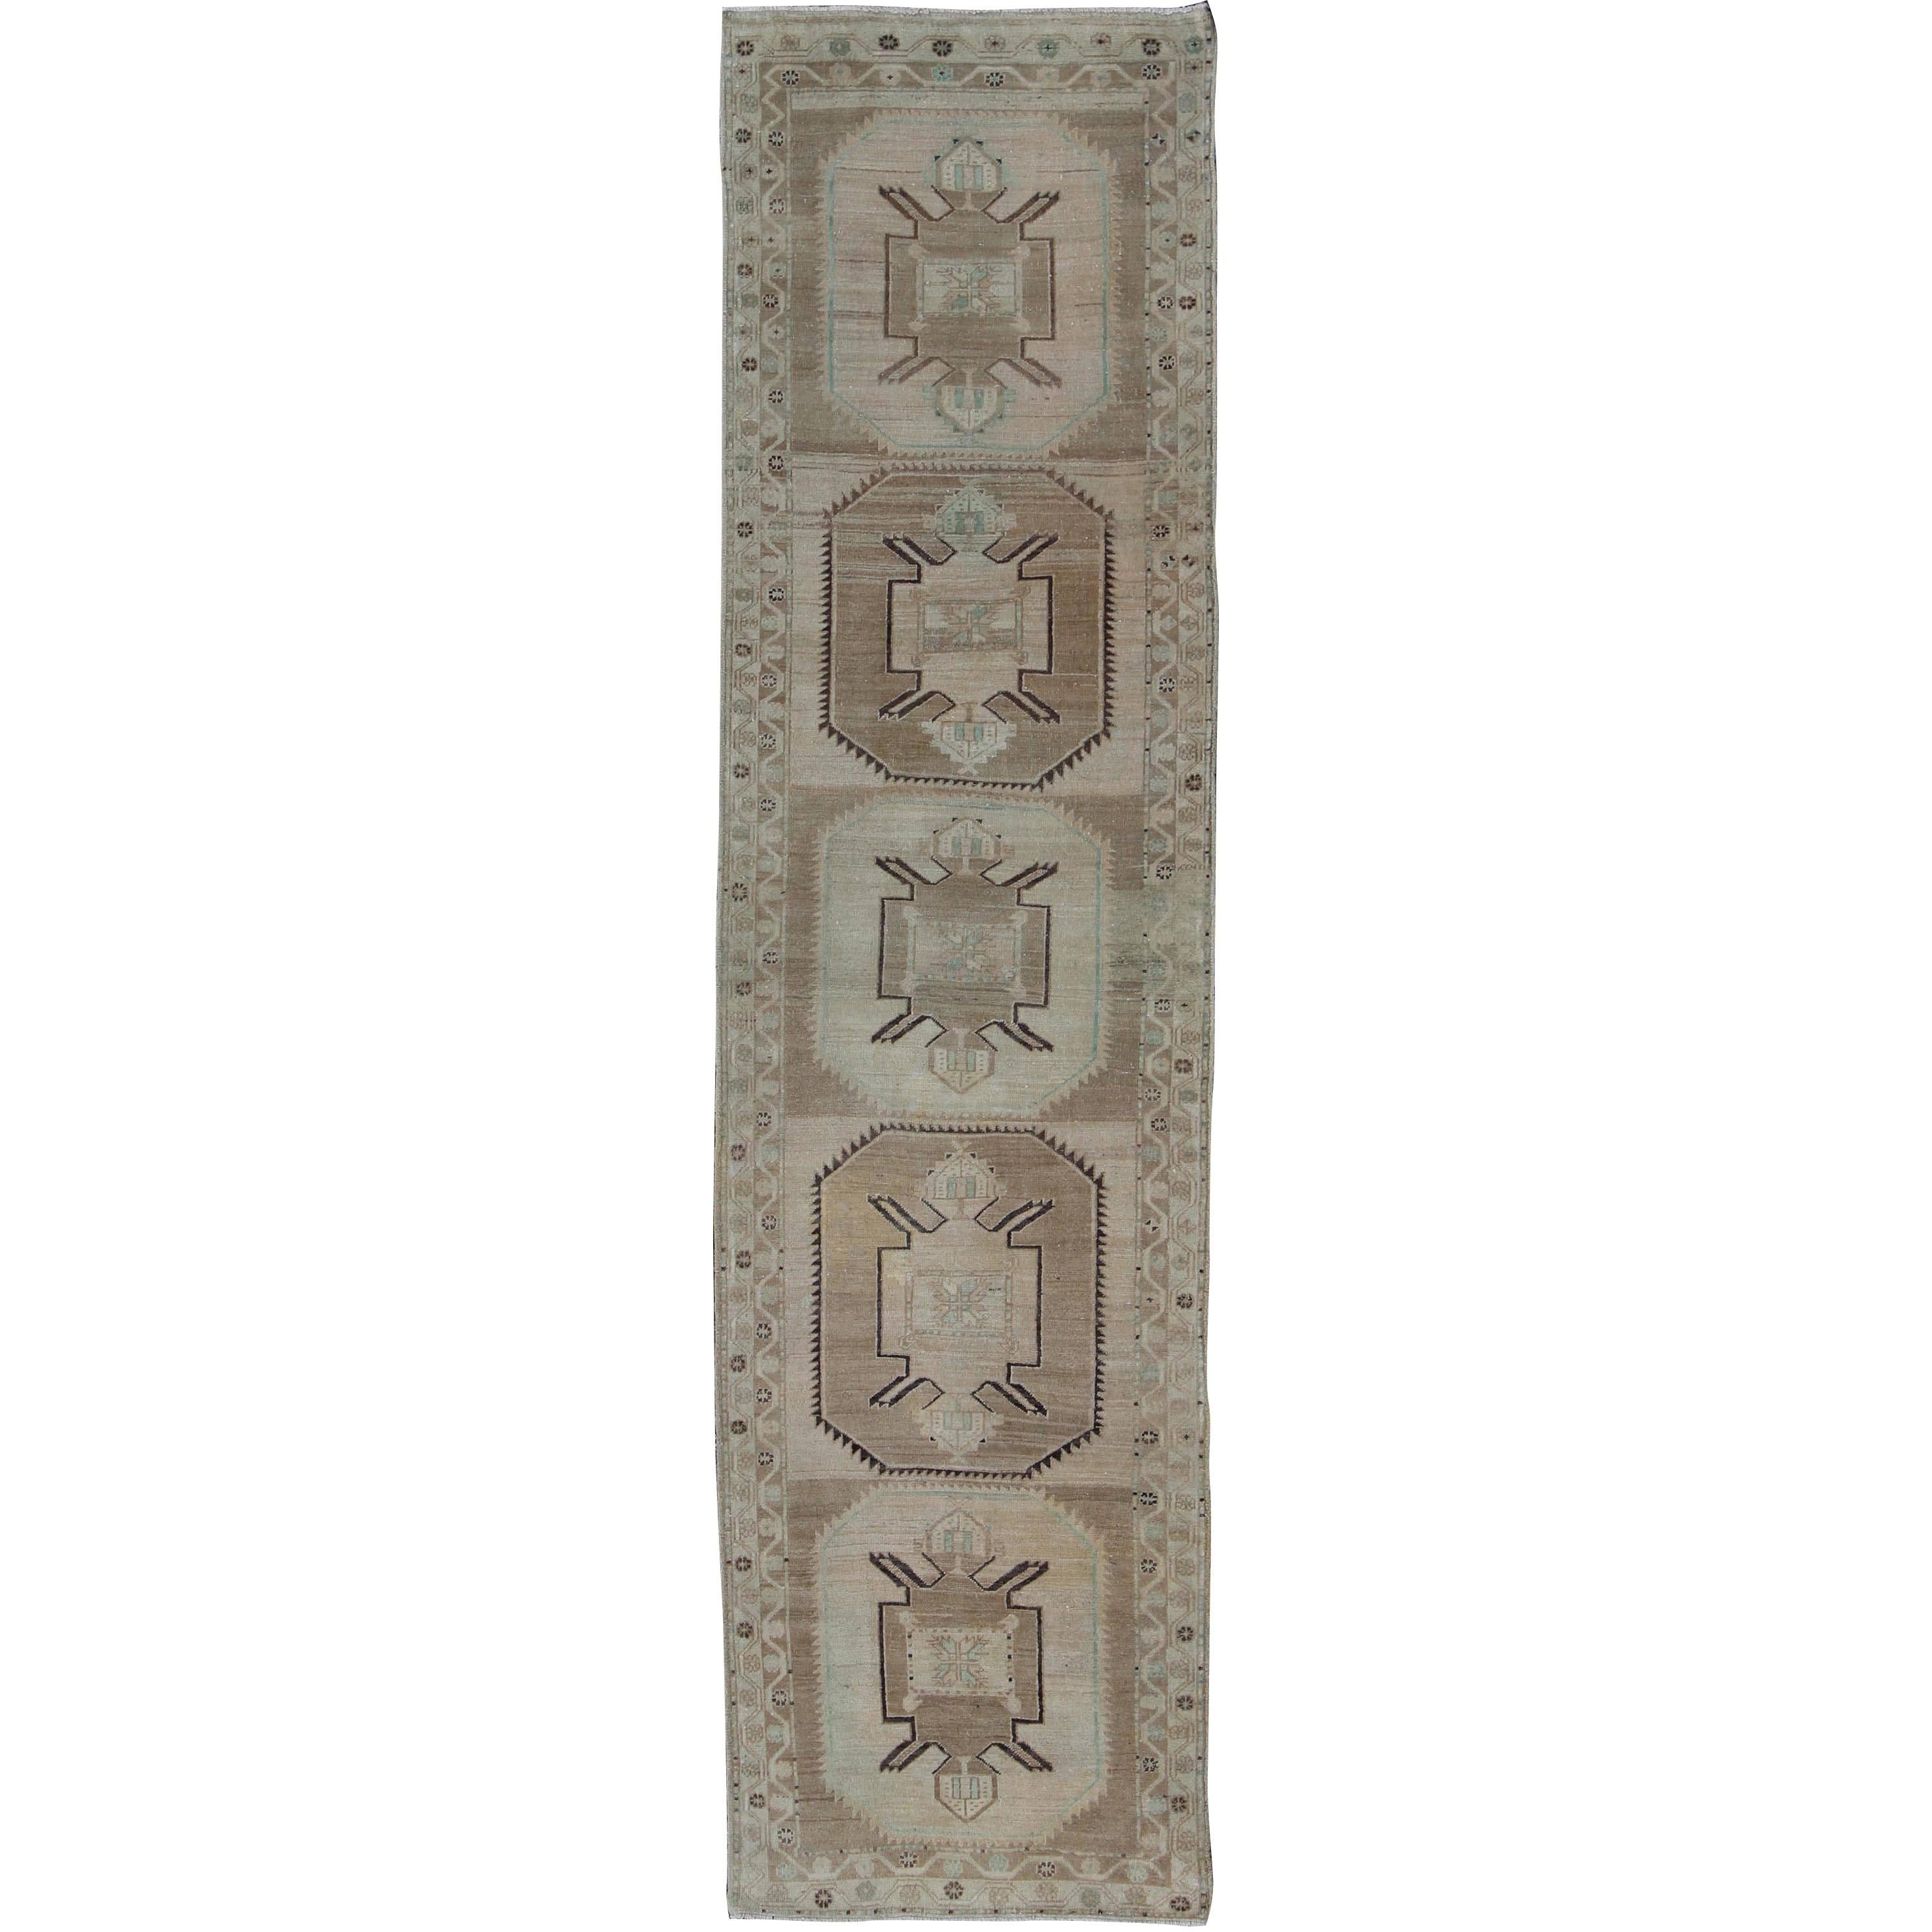 Oushak Runner with Geometric Design in Neutral Colors